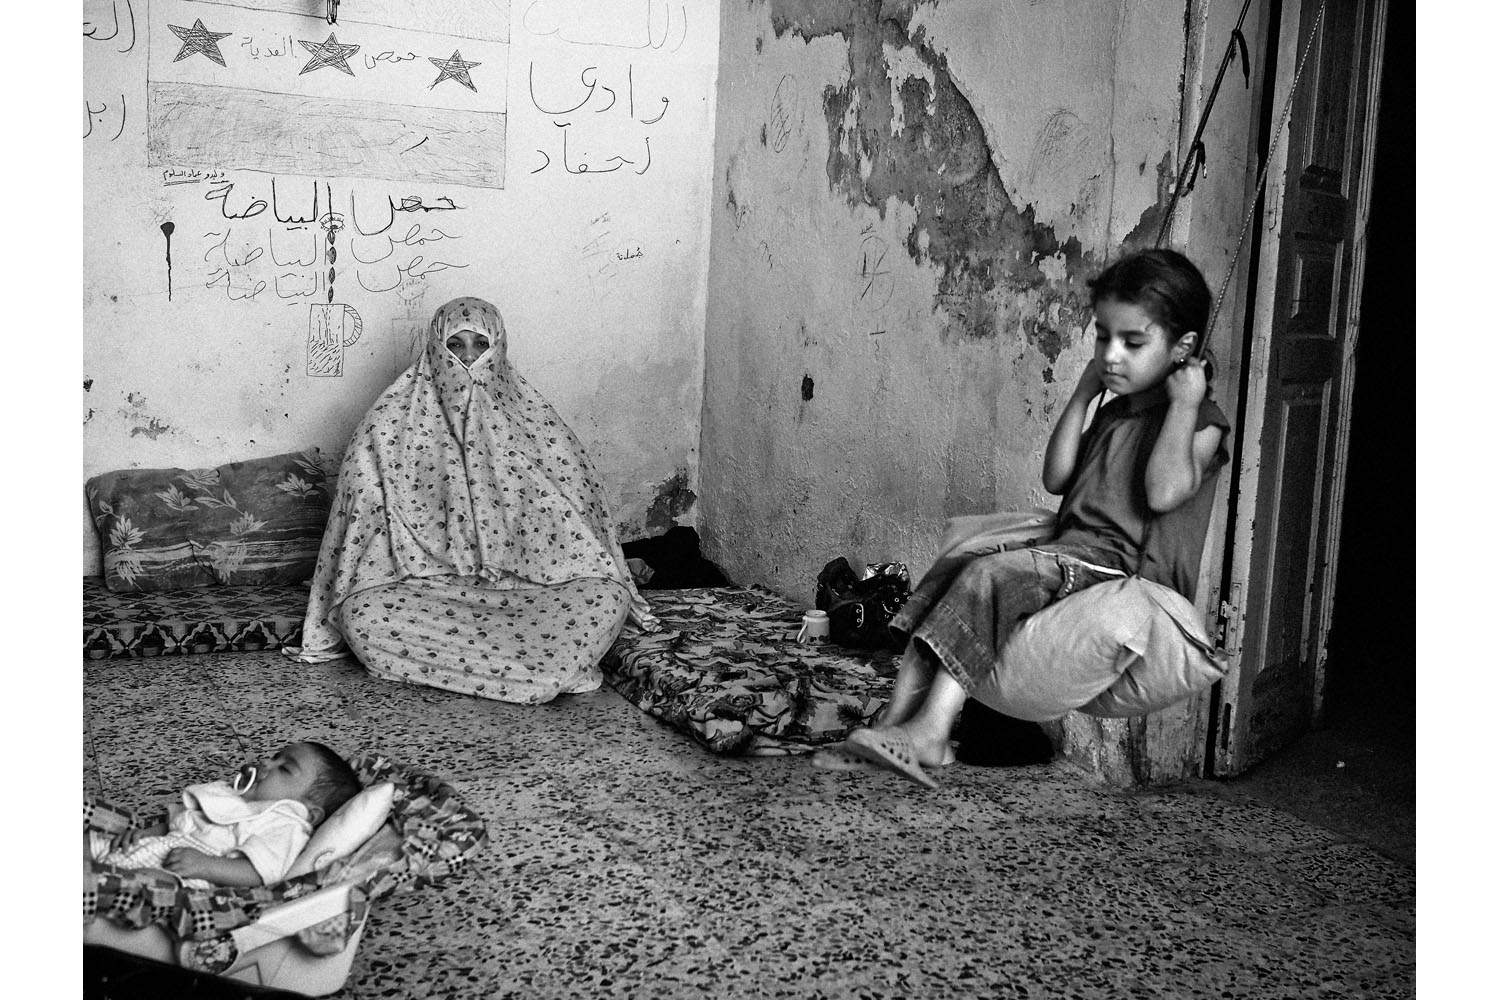 JORDAN. Amman. June 14, 2013. 9-year-old Hannen(right), sits on a swing inside her extended family's home in the Wadi Haddad district of East Amman, an area where many Syrian refugees have rented apartments. Haneen's family fled the besieged Syrian city of Homs two months ago. Her father and all the men in the family are currently in Syria fighting with the Free Syrian Army.Contact email:New York : photography@magnumphotos.comParis : magnum@magnumphotos.frLondon : magnum@magnumphotos.co.ukTokyo : tokyo@magnumphotos.co.jpContact phones:New York : +1 212 929 6000Paris: + 33 1 53 42 50 00London: + 44 20 7490 1771Tokyo: + 81 3 3219 0771Image URL:http://www.magnumphotos.com/Archive/C.aspx?VP3=ViewBox_VPage&IID=2K7O3RKN1E5S&CT=Image&IT=ZoomImage01_VForm